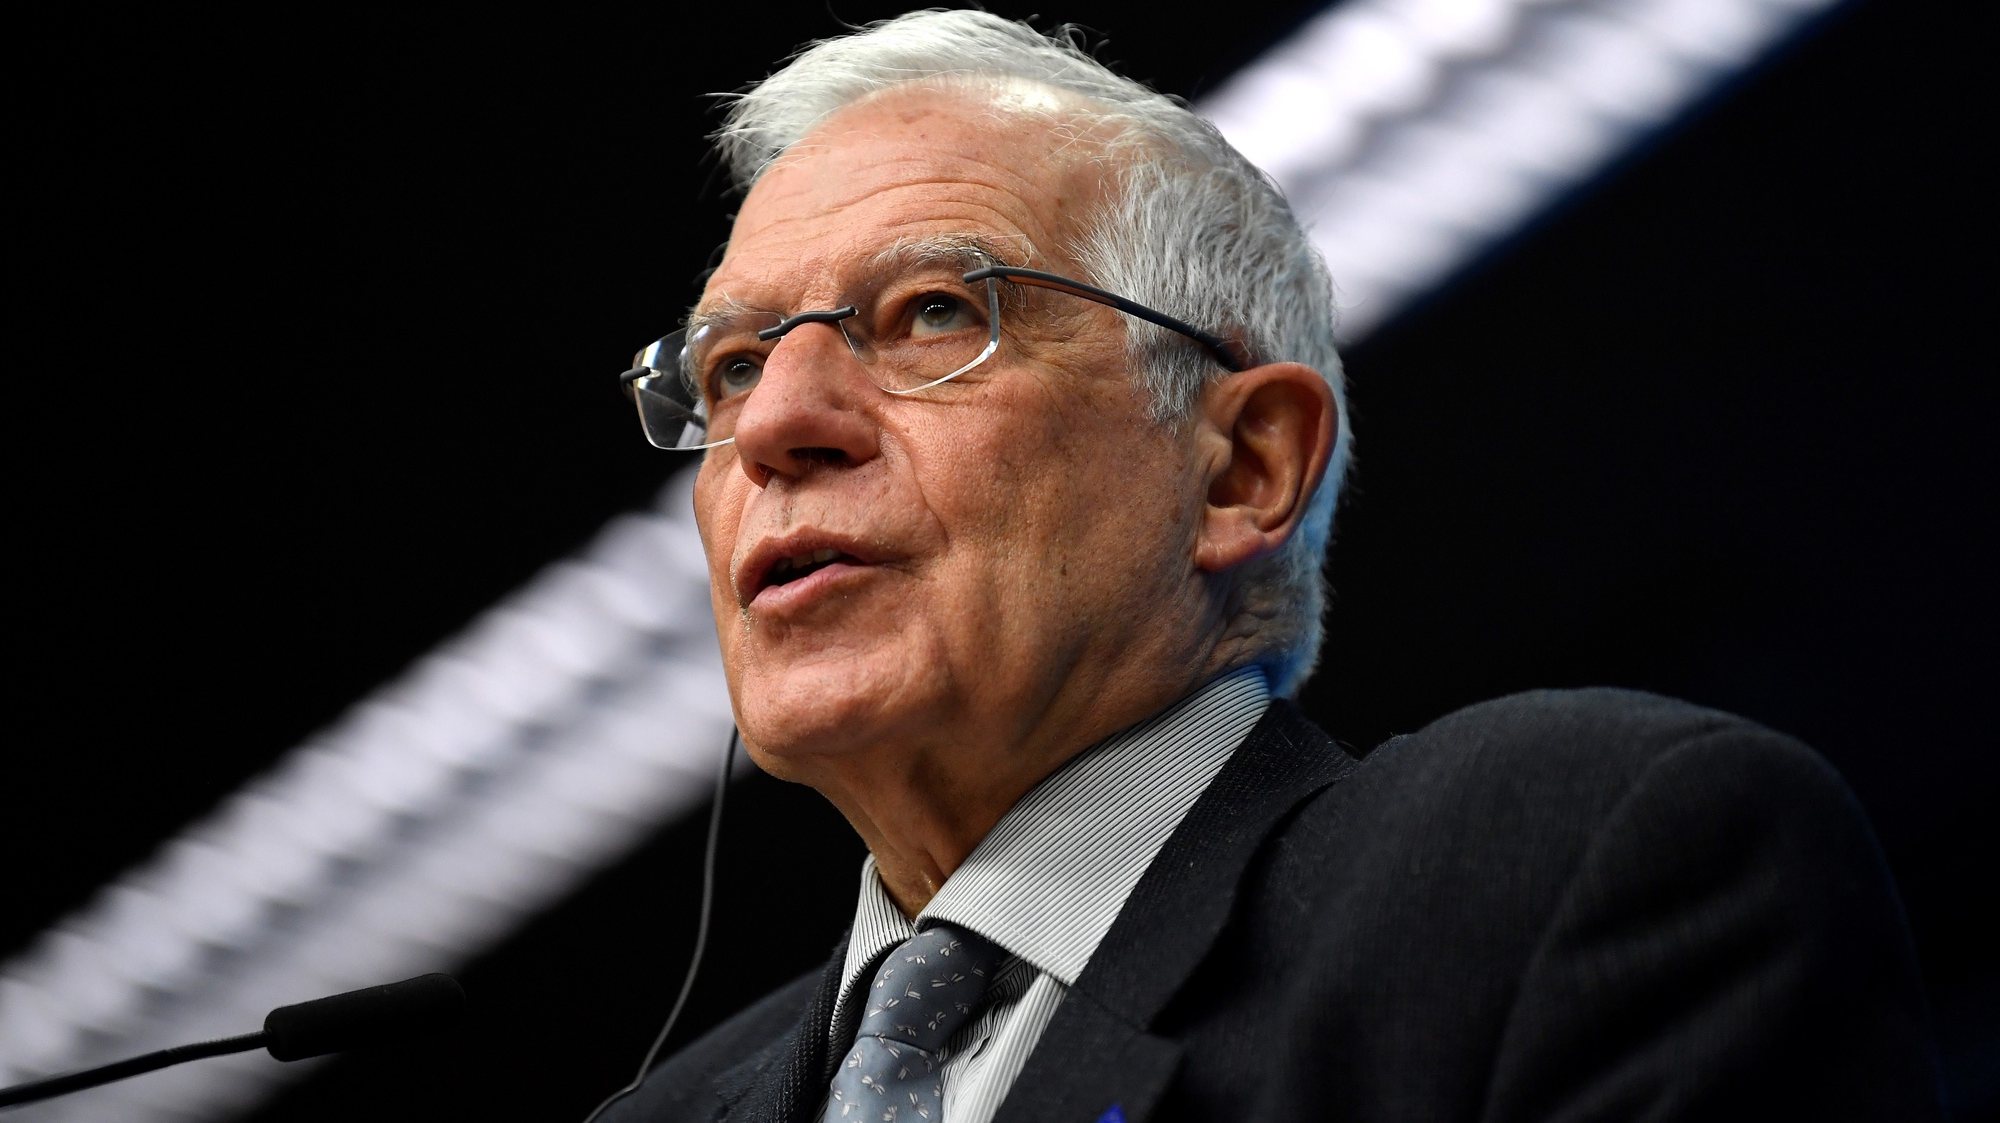 epa08964563 European Union for Foreign Affairs and Security Policy Josep Borrell speaks during a press conference following a meeting with EU Ministers of Foreign Affairs at the EU headquarters, in Brussels, Belgium, 25 January 2021.  EPA/JOHN THYS / POOL